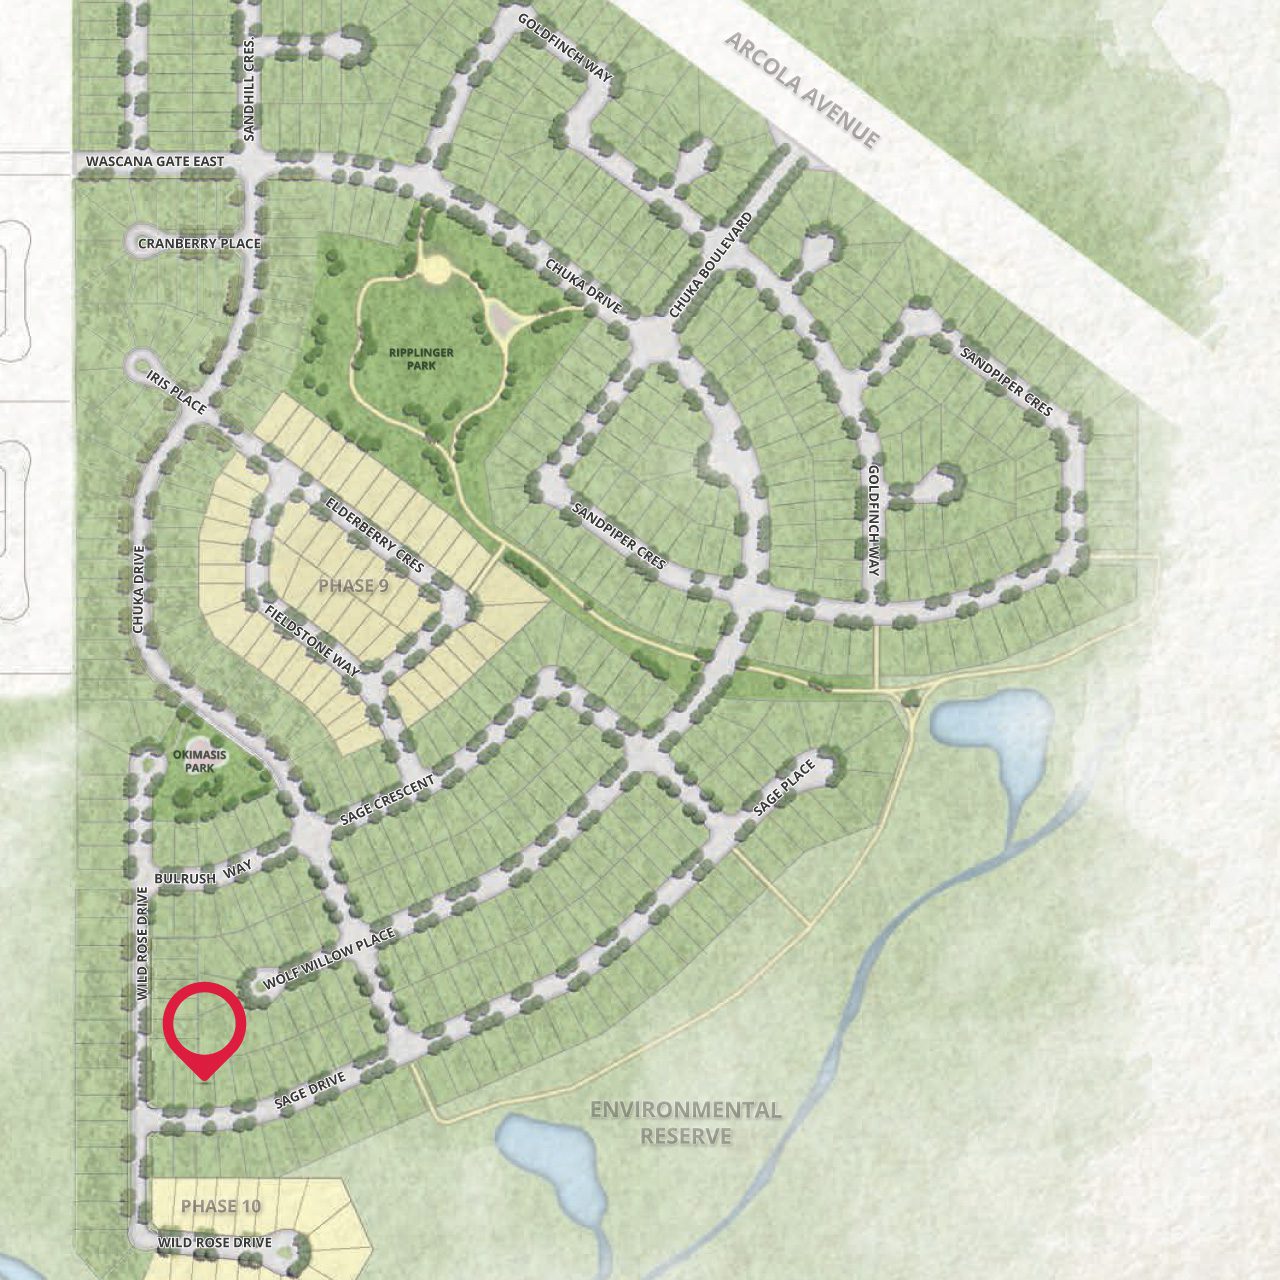 The site plan for the Creeks neighbourhood development with a red pin showing the homes location in the neighbourhood.